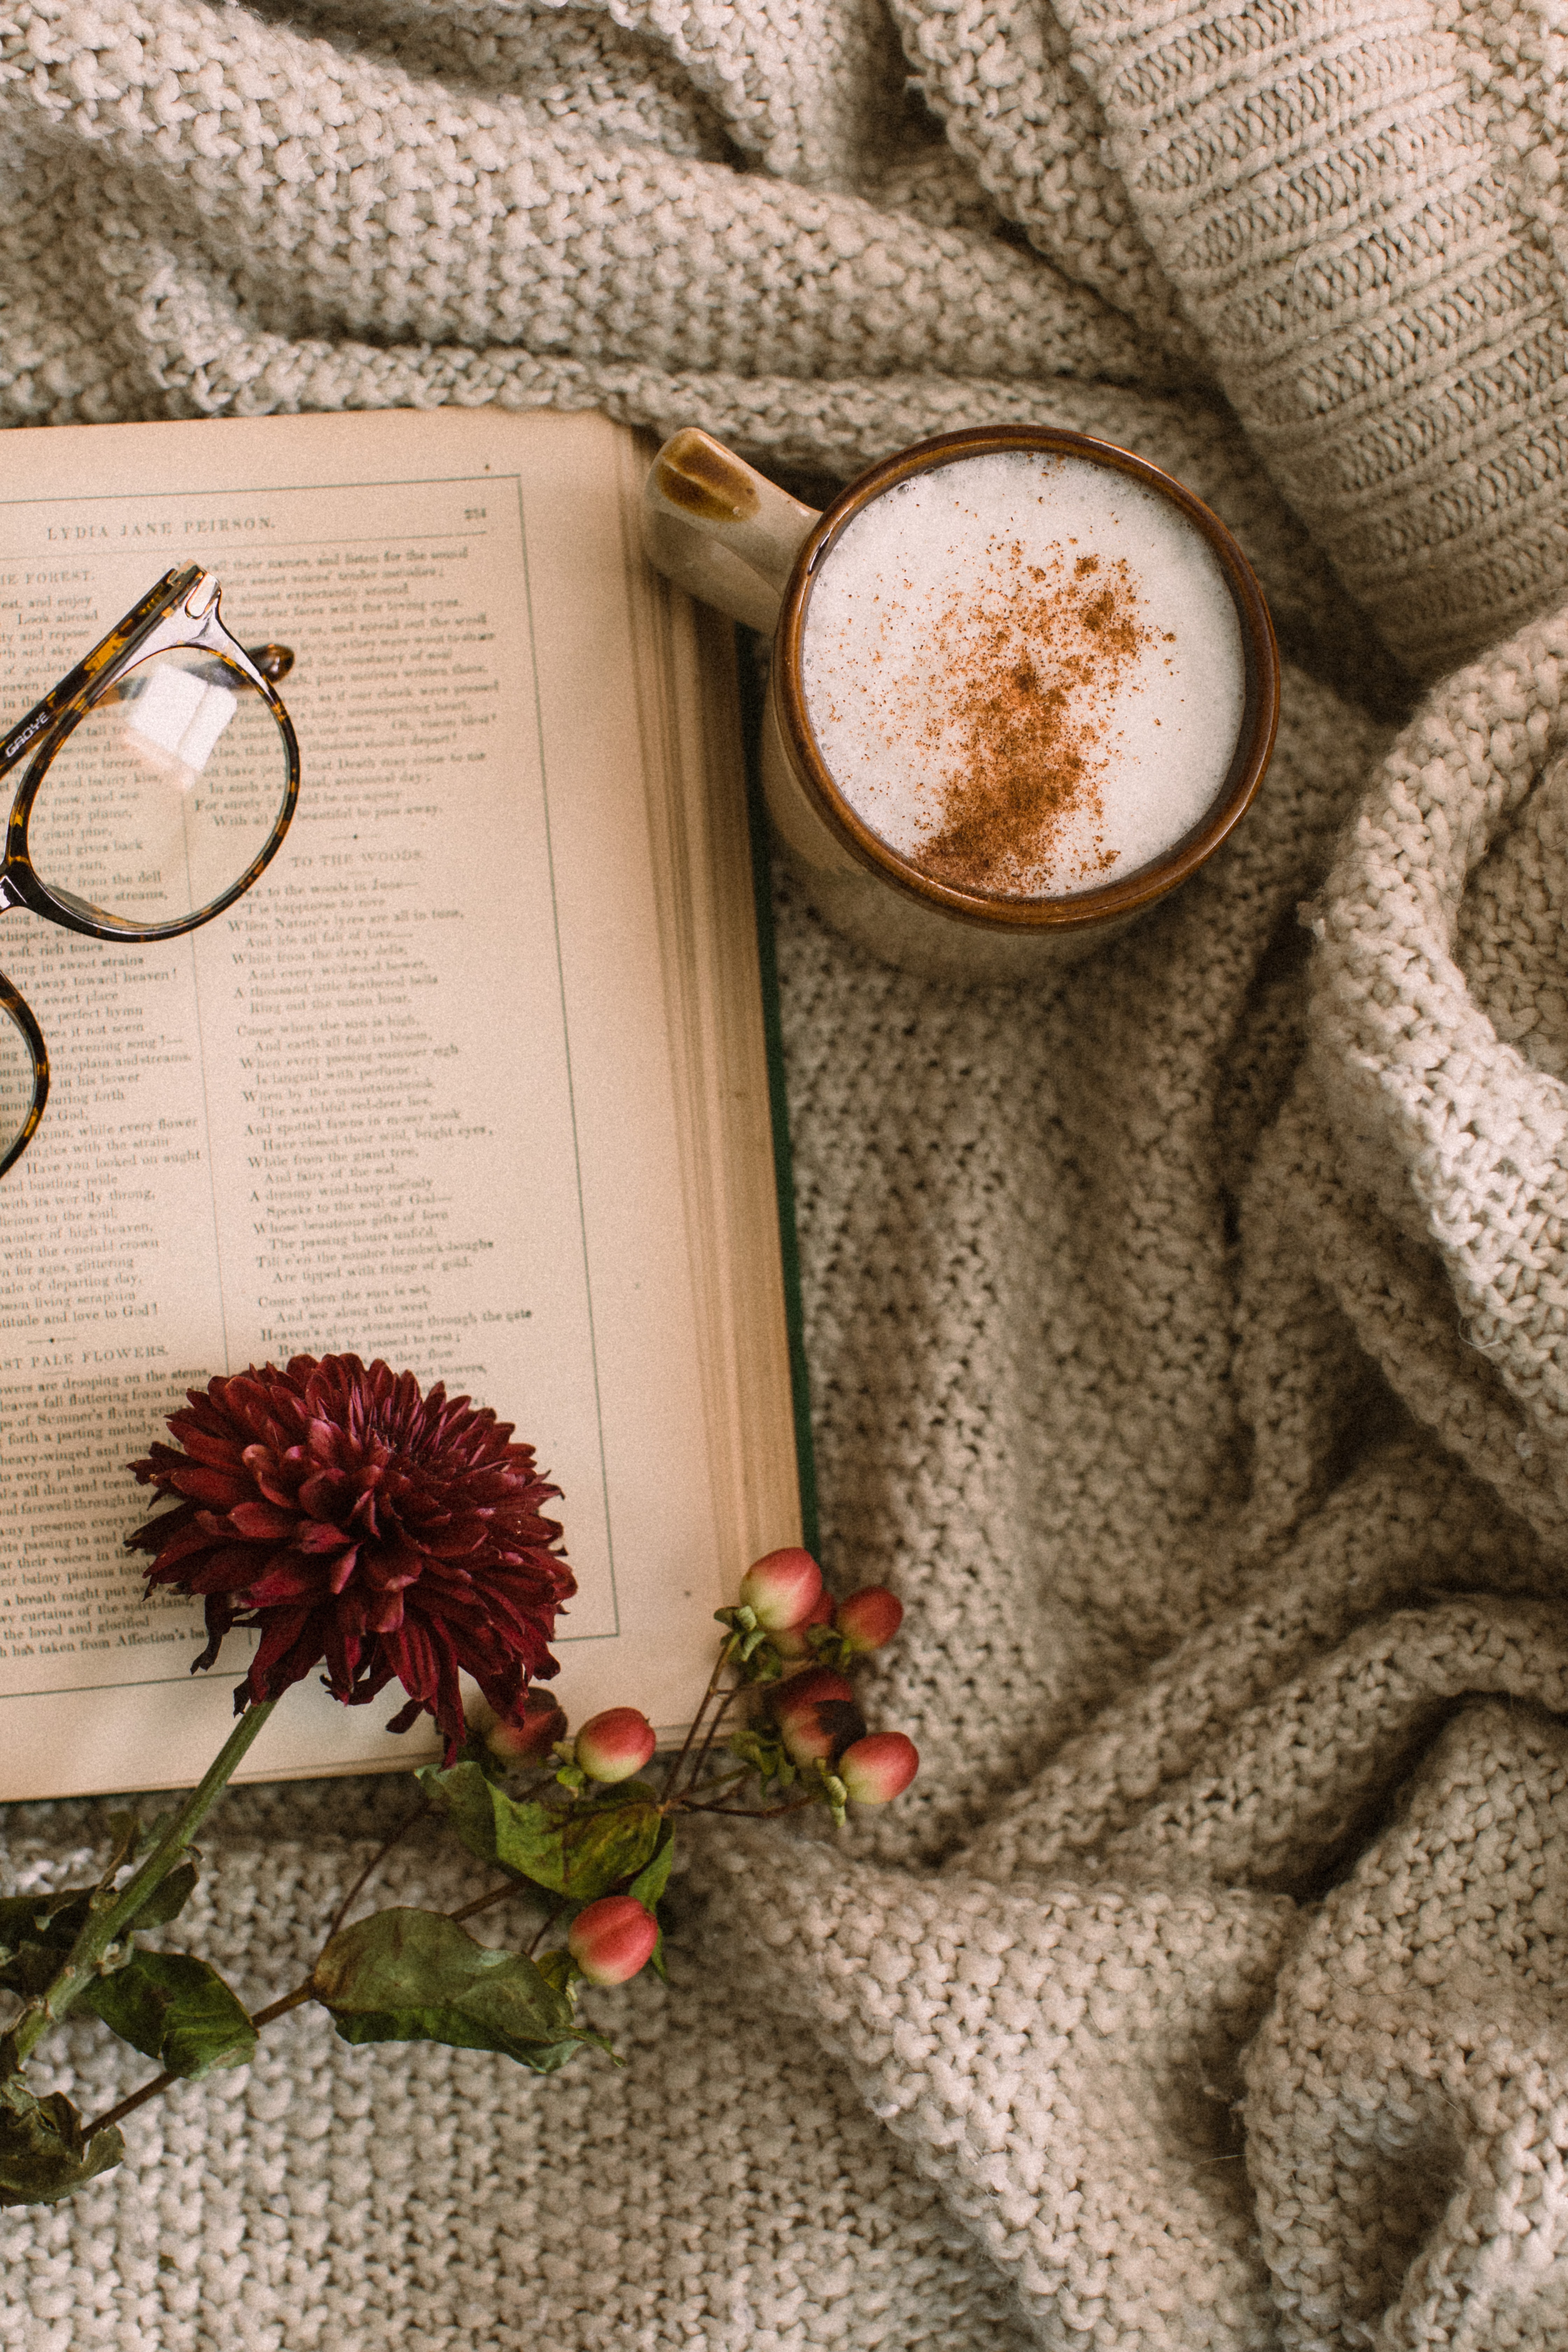 book, cup, food, spectacles, flowers, coffee, cappuccino, glasses, mug download HD wallpaper